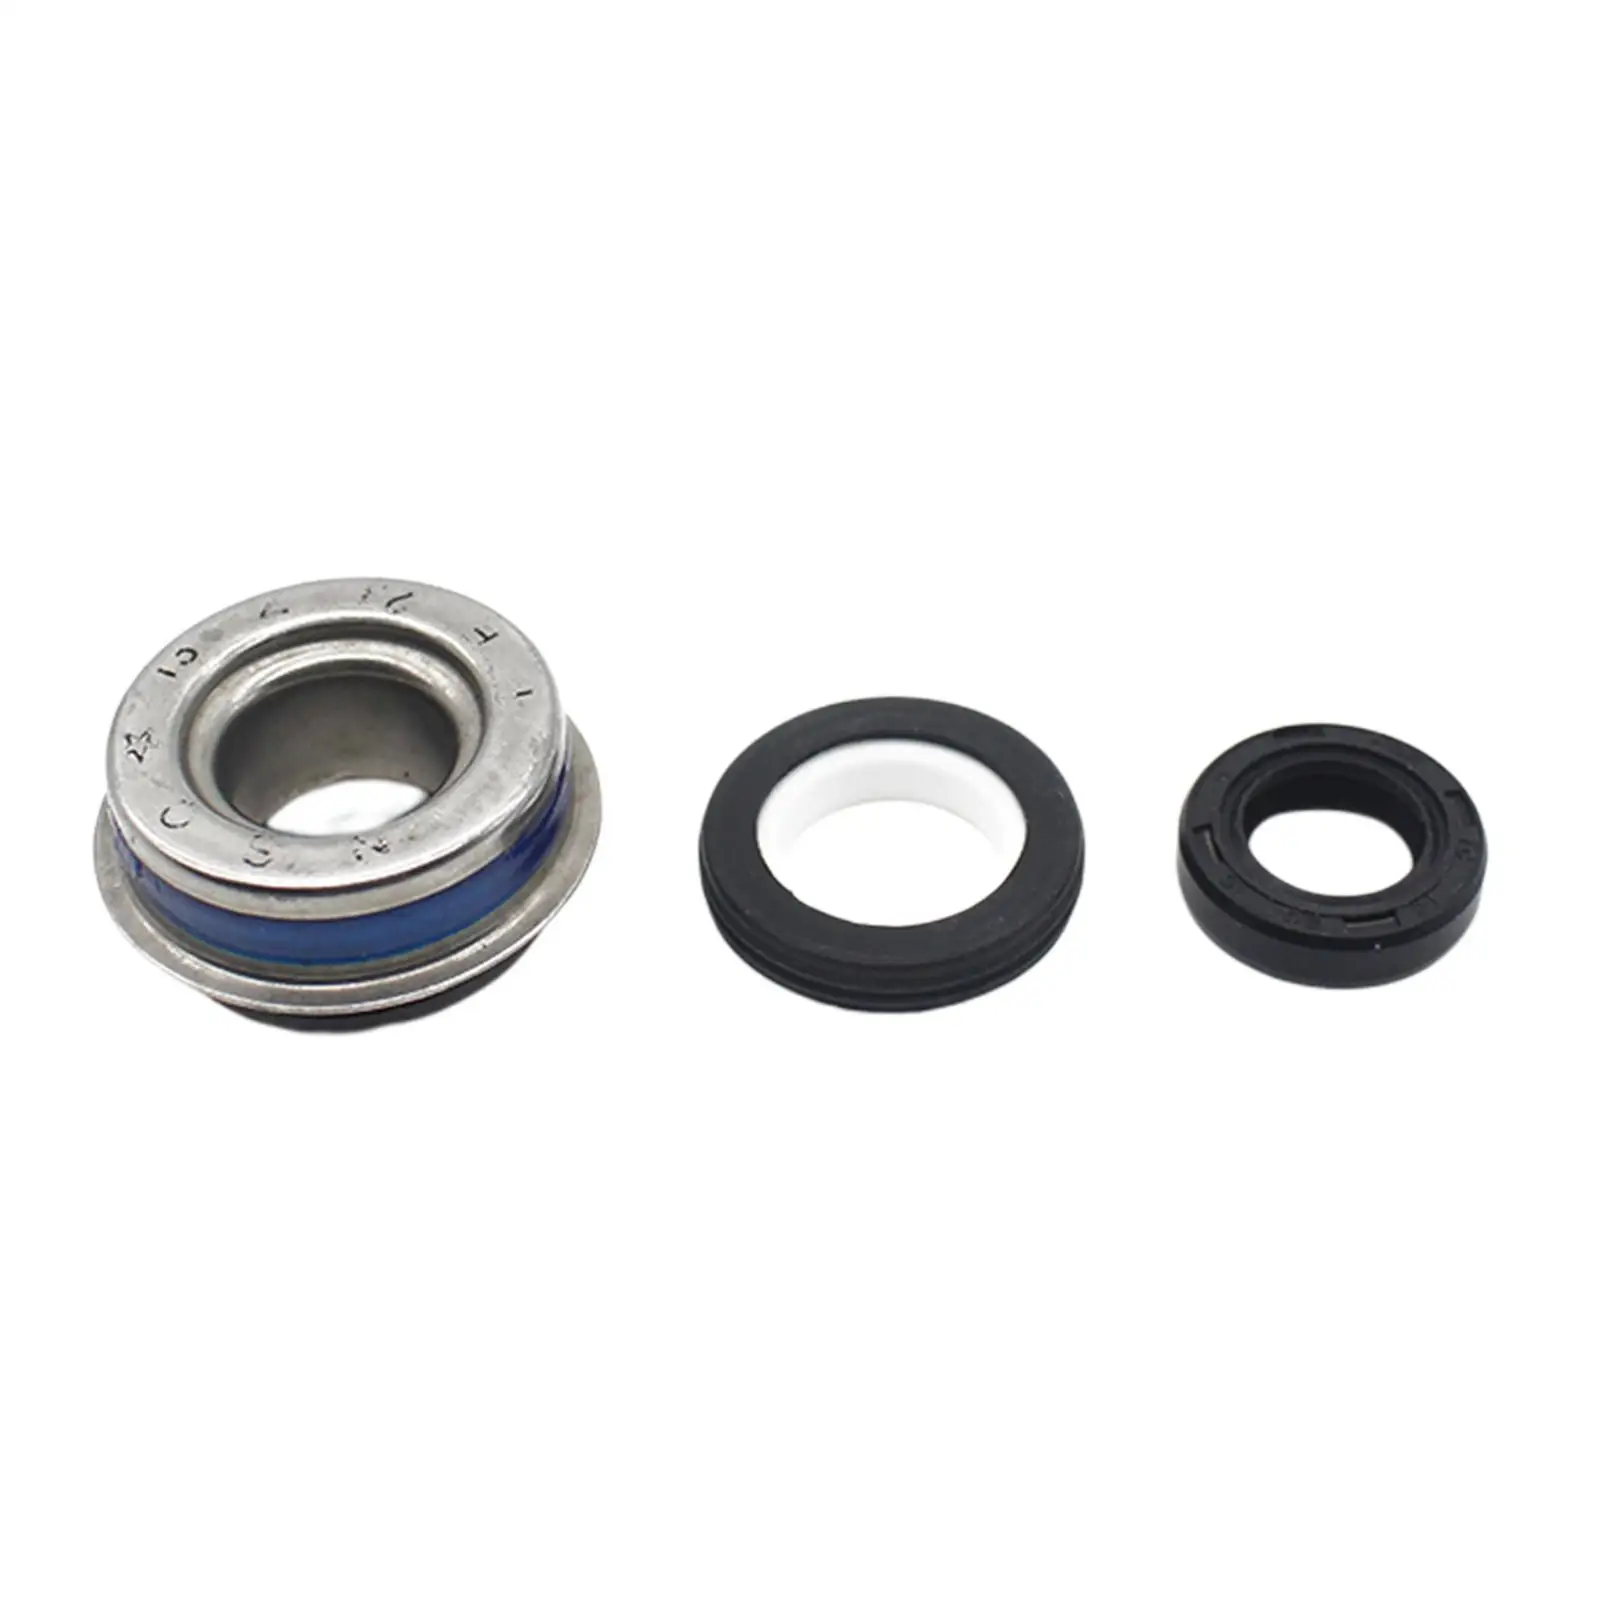 Water Pump Oil Seals Fit for YP500 Ab 2011 Easy to Install High Performance